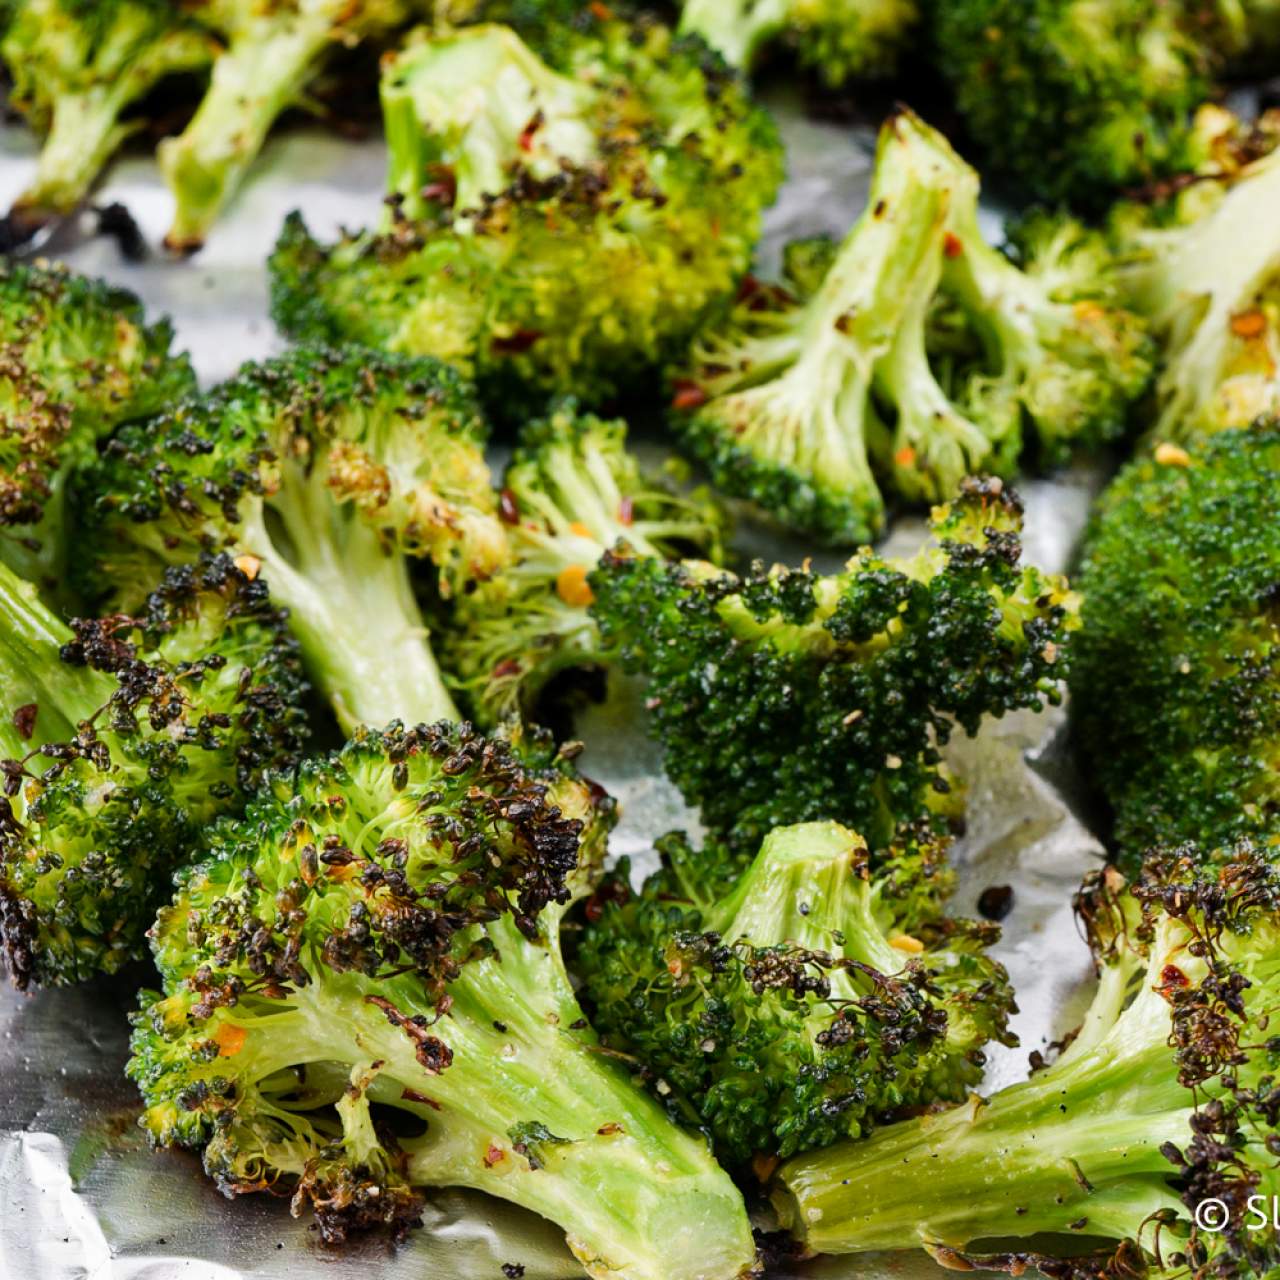 Broccoli Health Benefits, Nutrition Facts, and Recipes to Try